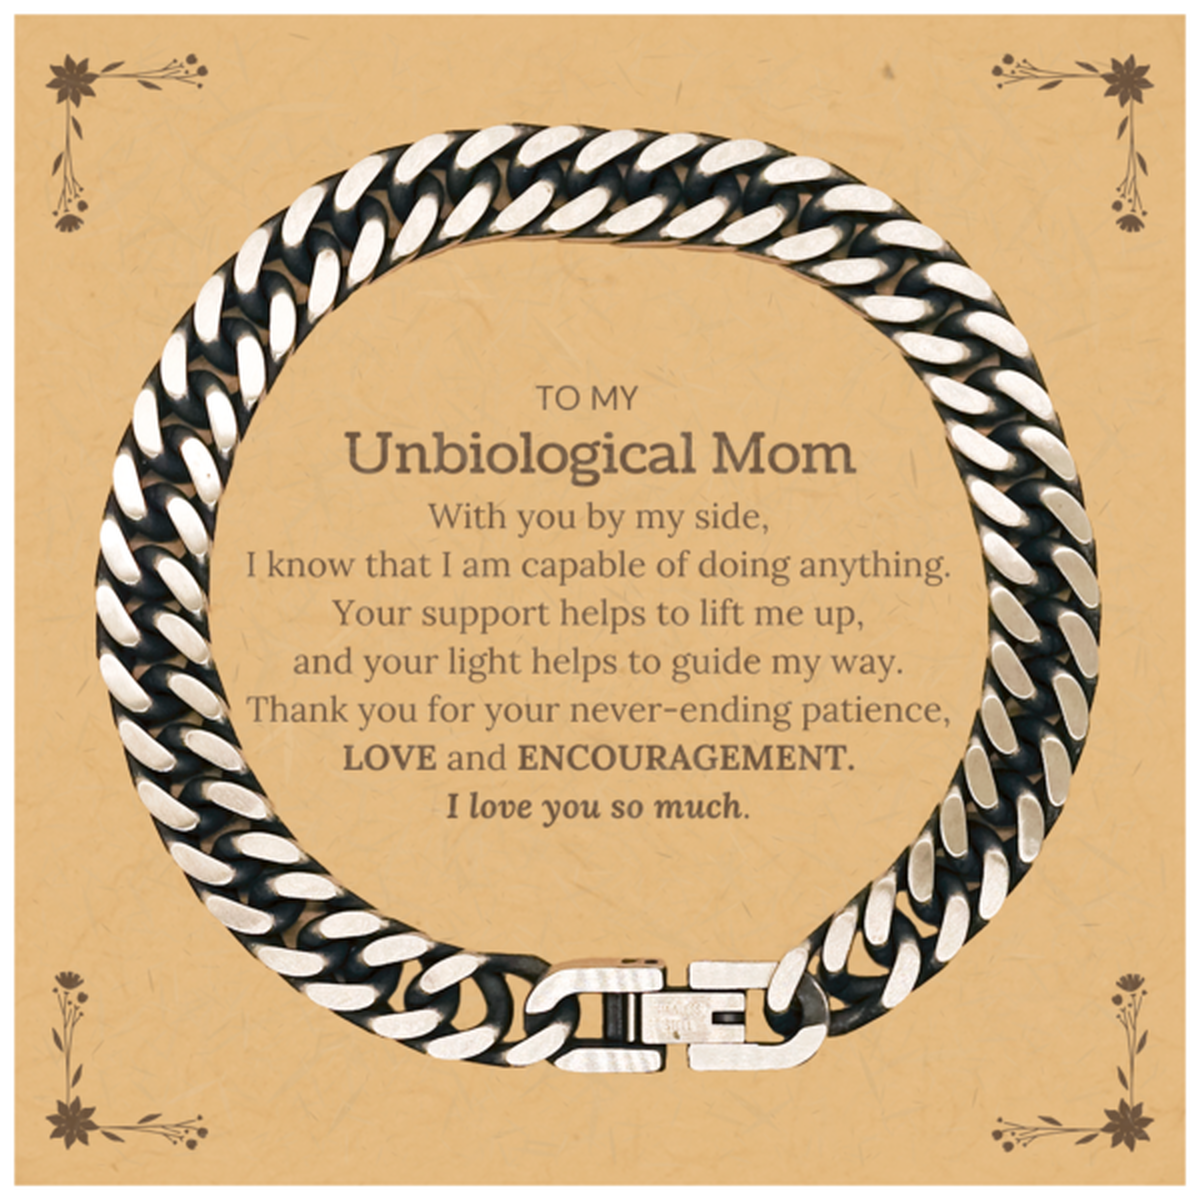 Appreciation Unbiological Mom Cuban Link Chain Bracelet Gifts, To My Unbiological Mom Birthday Christmas Wedding Keepsake Gifts for Unbiological Mom With you by my side, I know that I am capable of doing anything. I love you so much